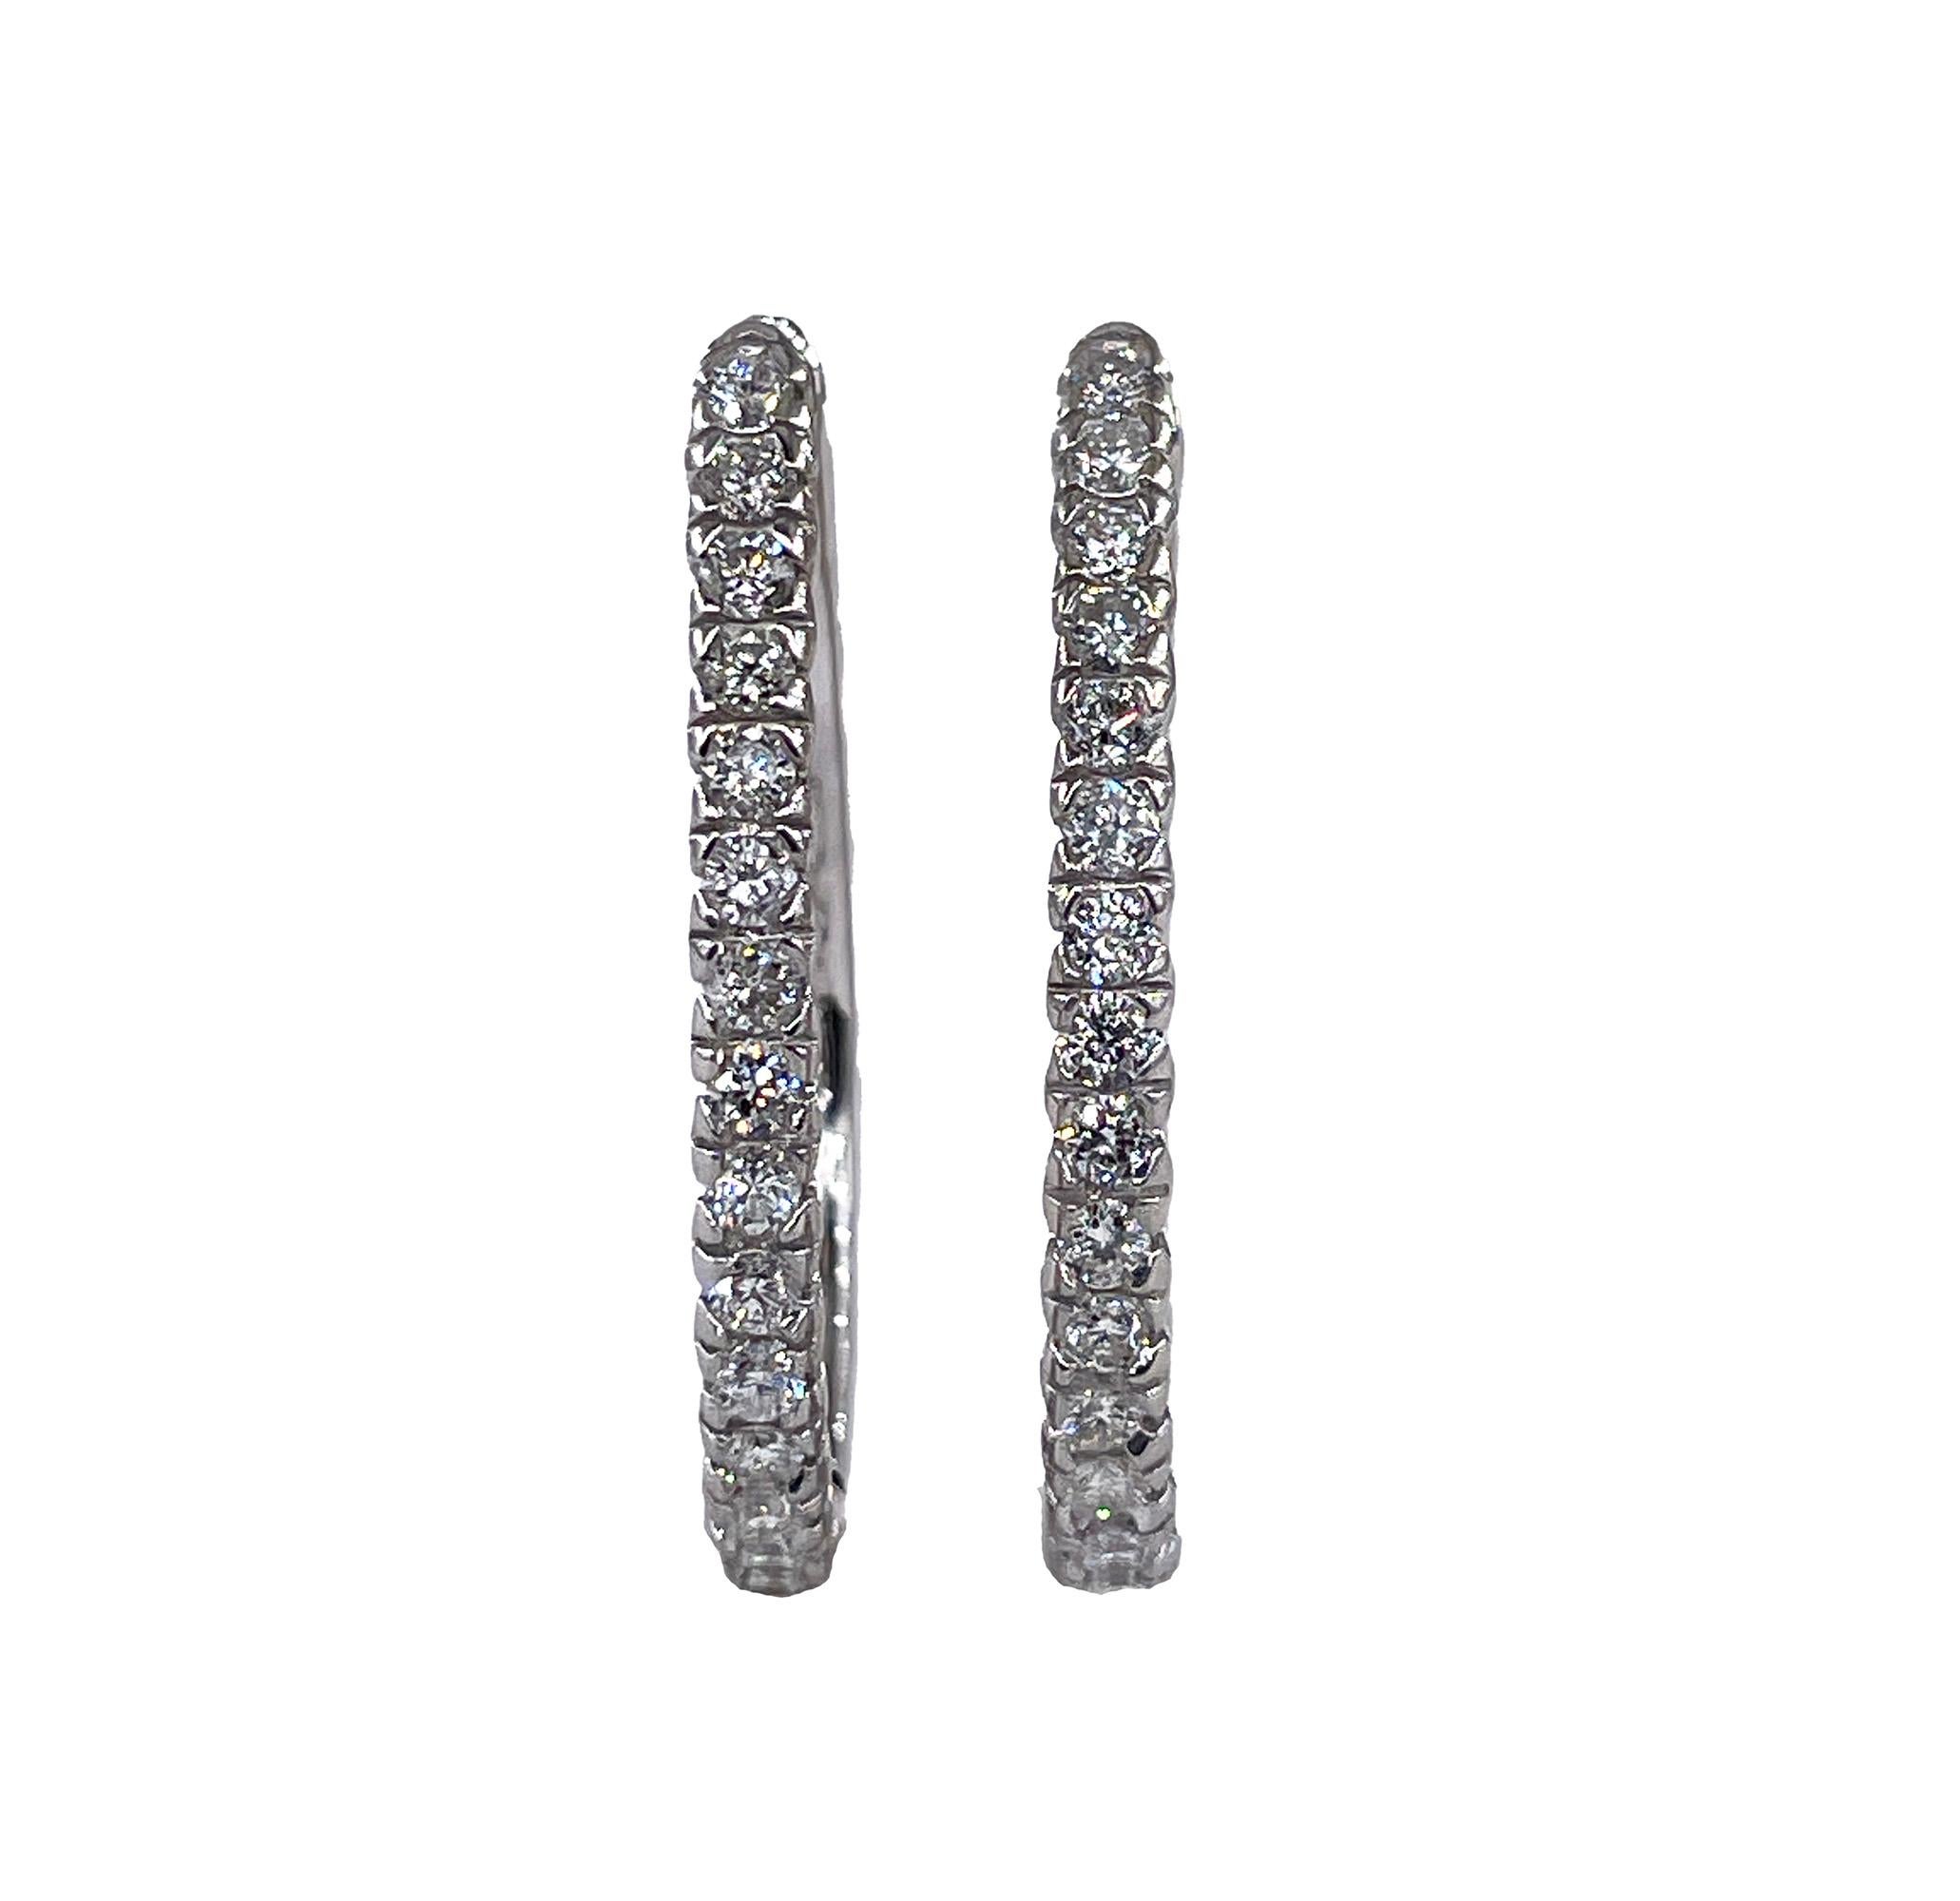 Sonia B. Bitton 0.90ctw Round Diamonds Hoop Earrings Oval 14k White Gold 

This great pair will make the perfect gift: 14k white gold Sonia B. 0.90ctw elongated oval hoop earrings with bright and sparkly round brilliant diamonds. Sonia B Designs is